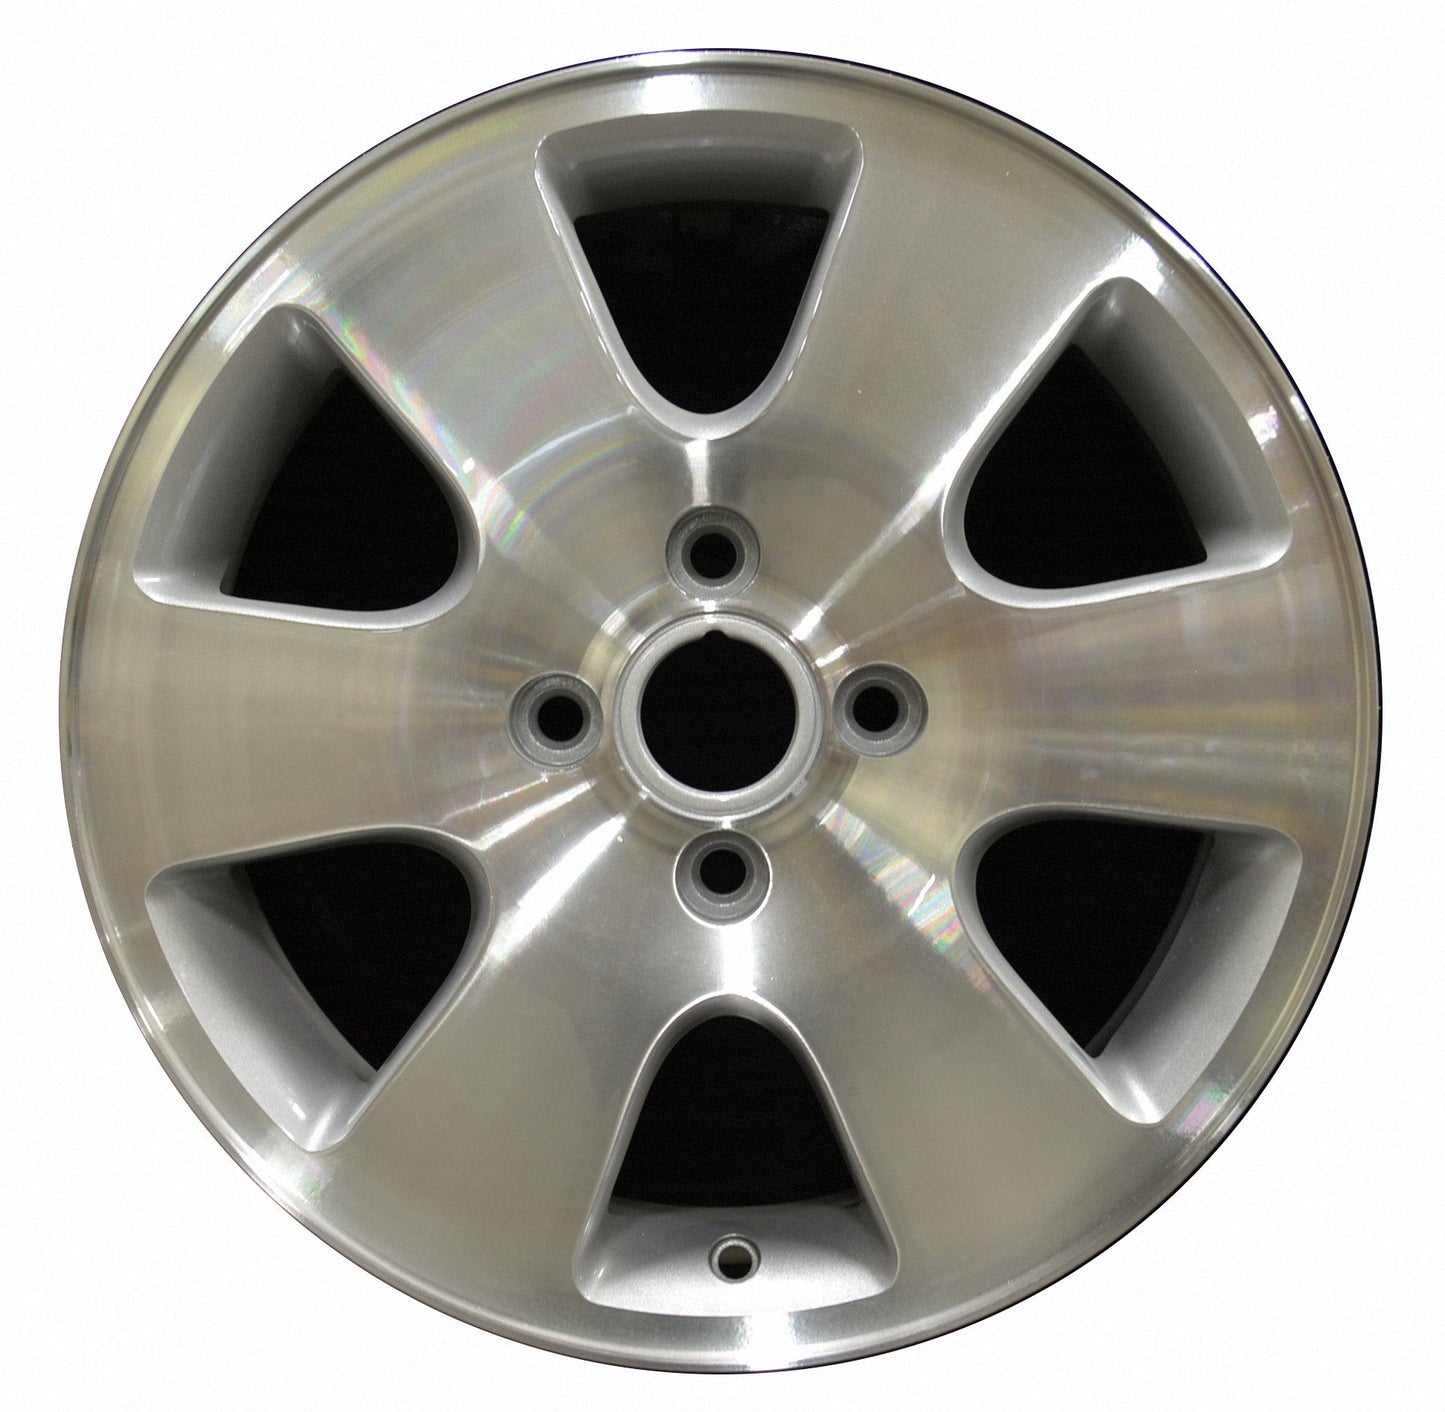 Ford Focus  2000, 2001, 2002, 2003 Factory OEM Car Wheel Size 16x6 Alloy WAO.3438.PS02.MA